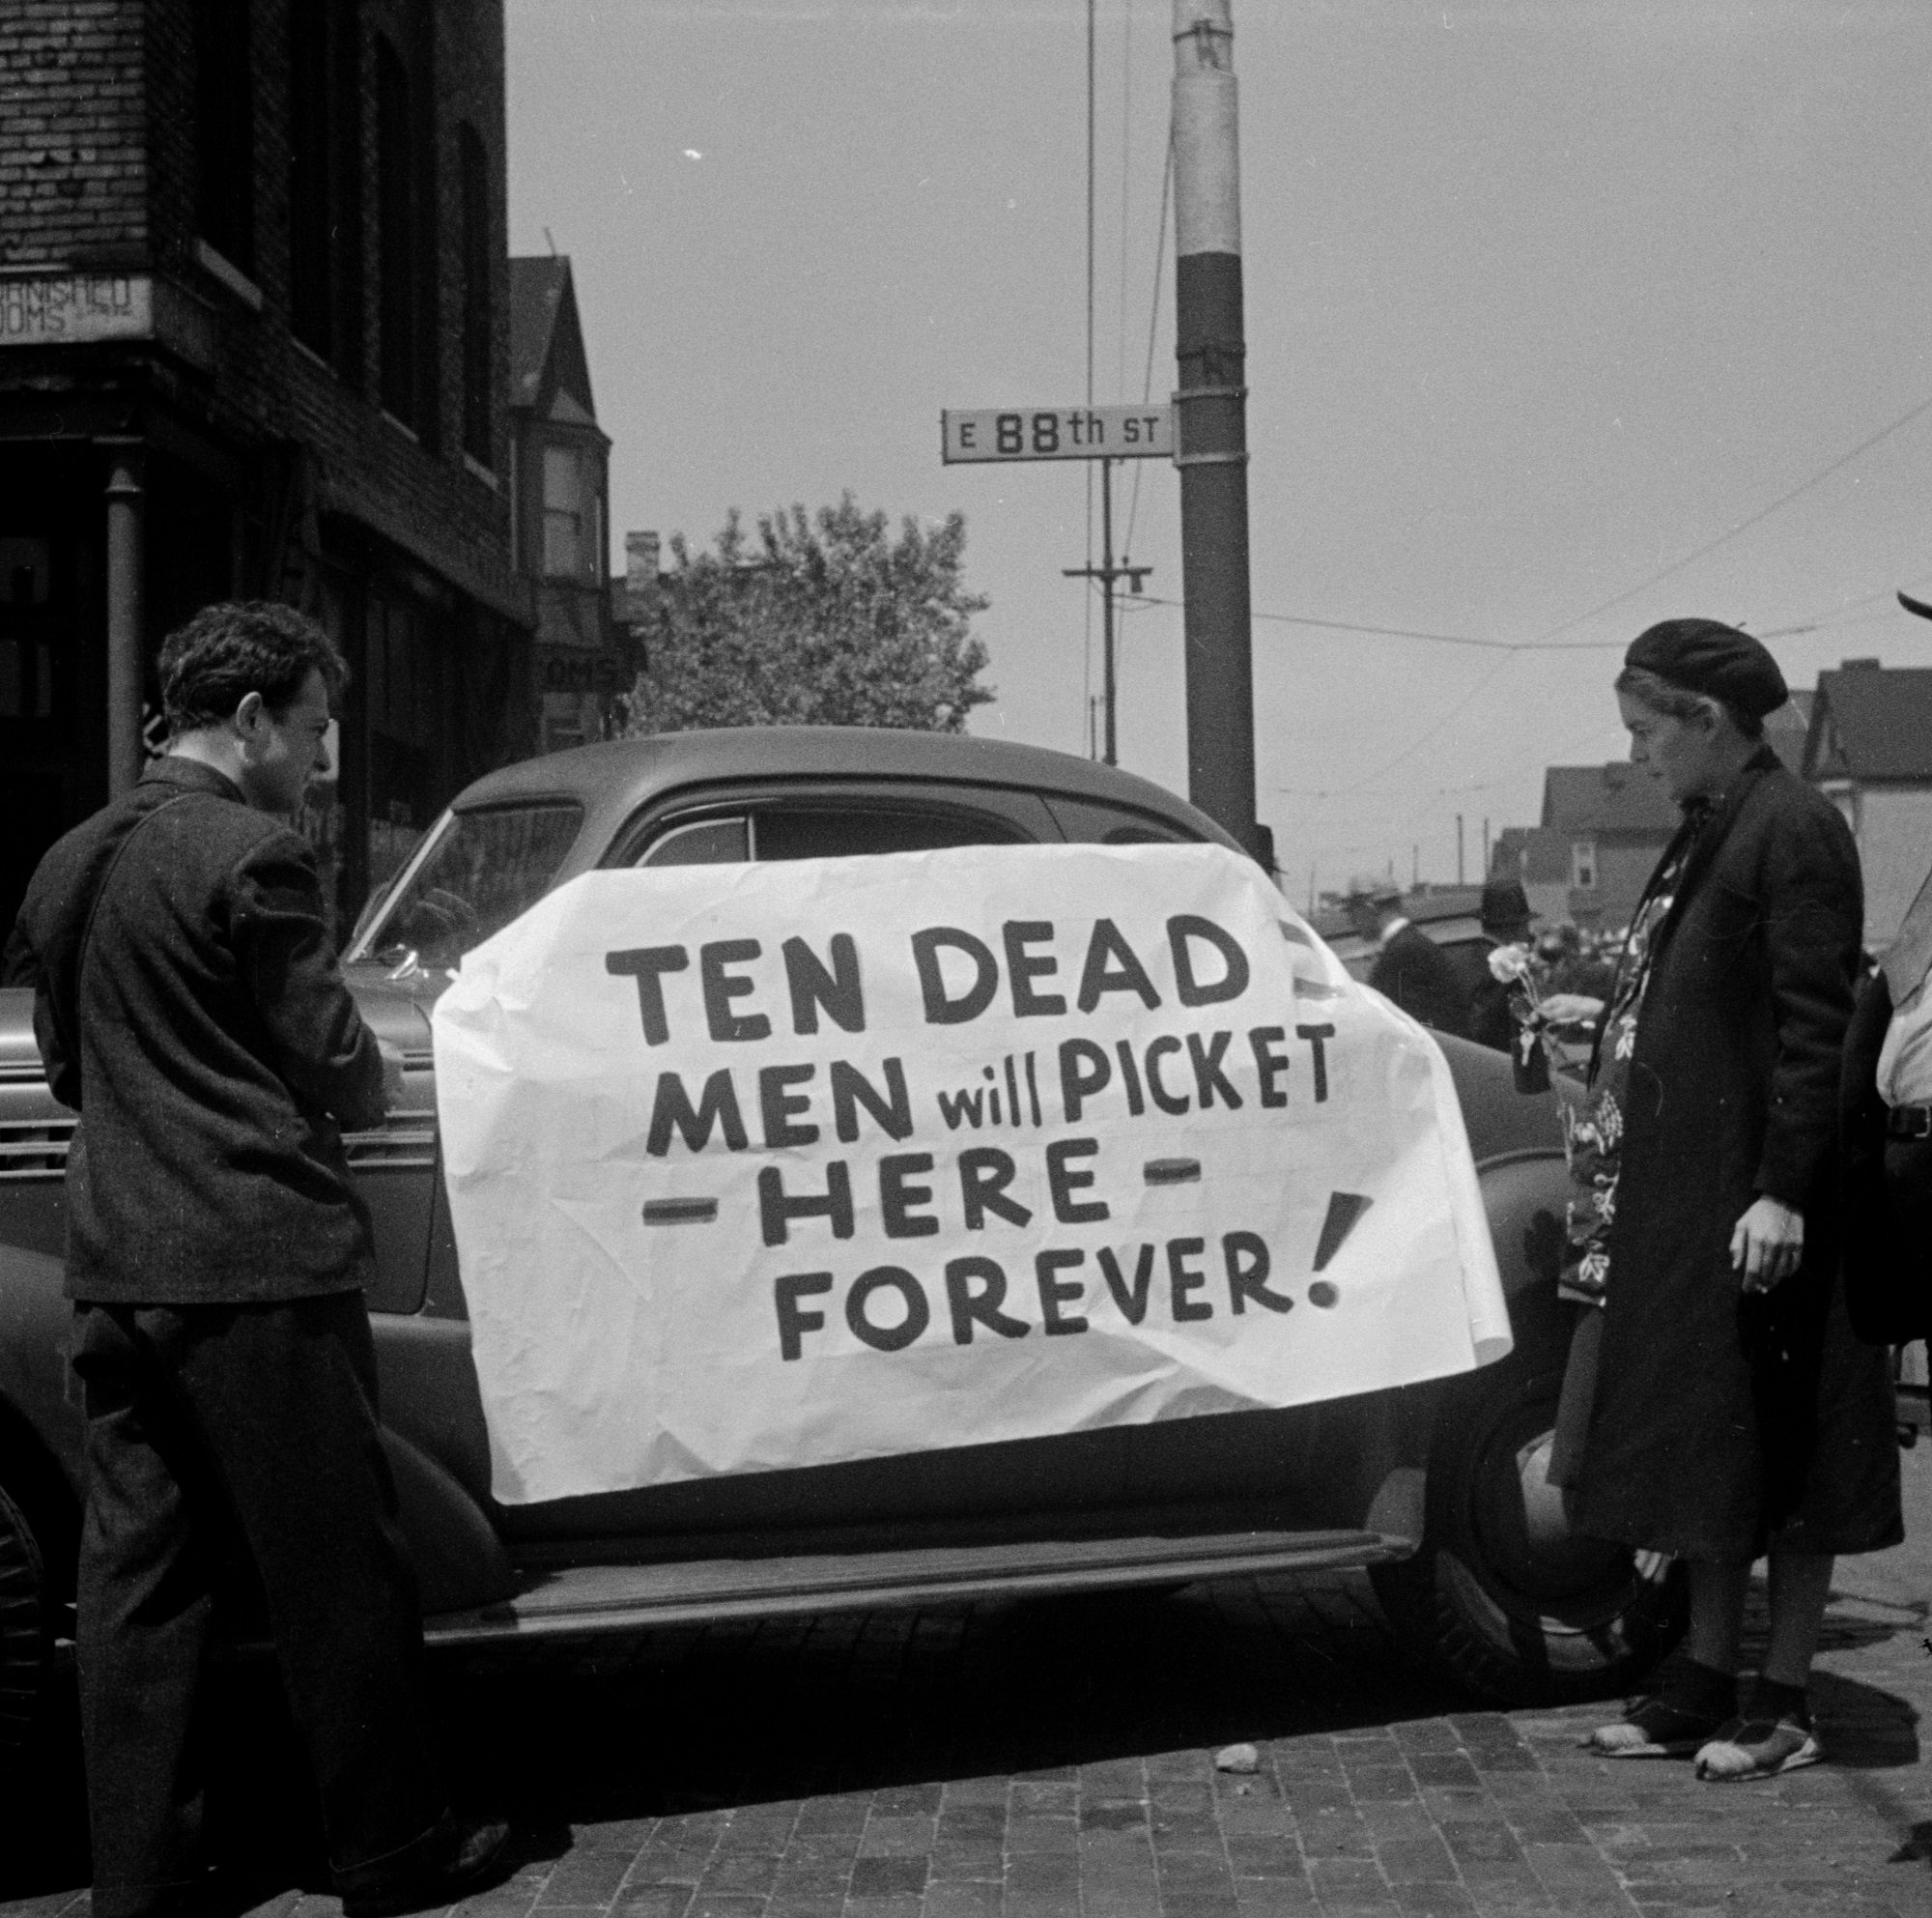 A woman and a man, who is possibly a photographer, looking at a sign on an automobile at the Republic Steel strike in Chicago, Illinois, 1937. One of a set of images showing police officers, politicians, and other people doing activities related to the strike.